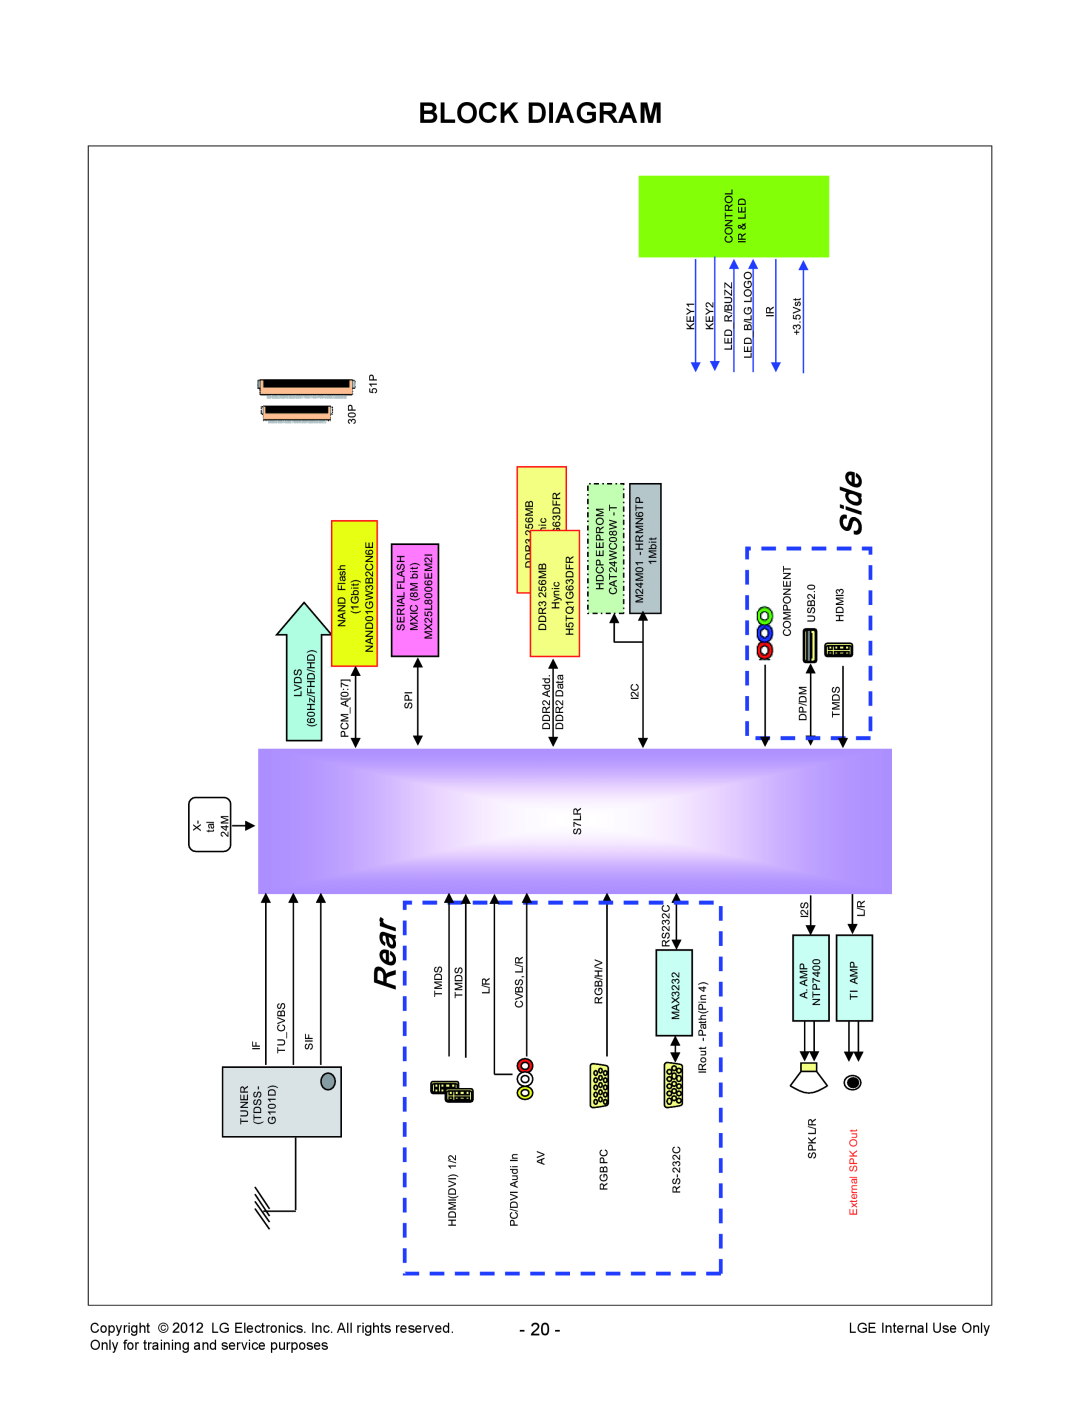 LG Electronics 32LT360C-ZA Block, Diagram, Rear, Side, reserved, LGE Internal Use Only, and service purposes, rights 